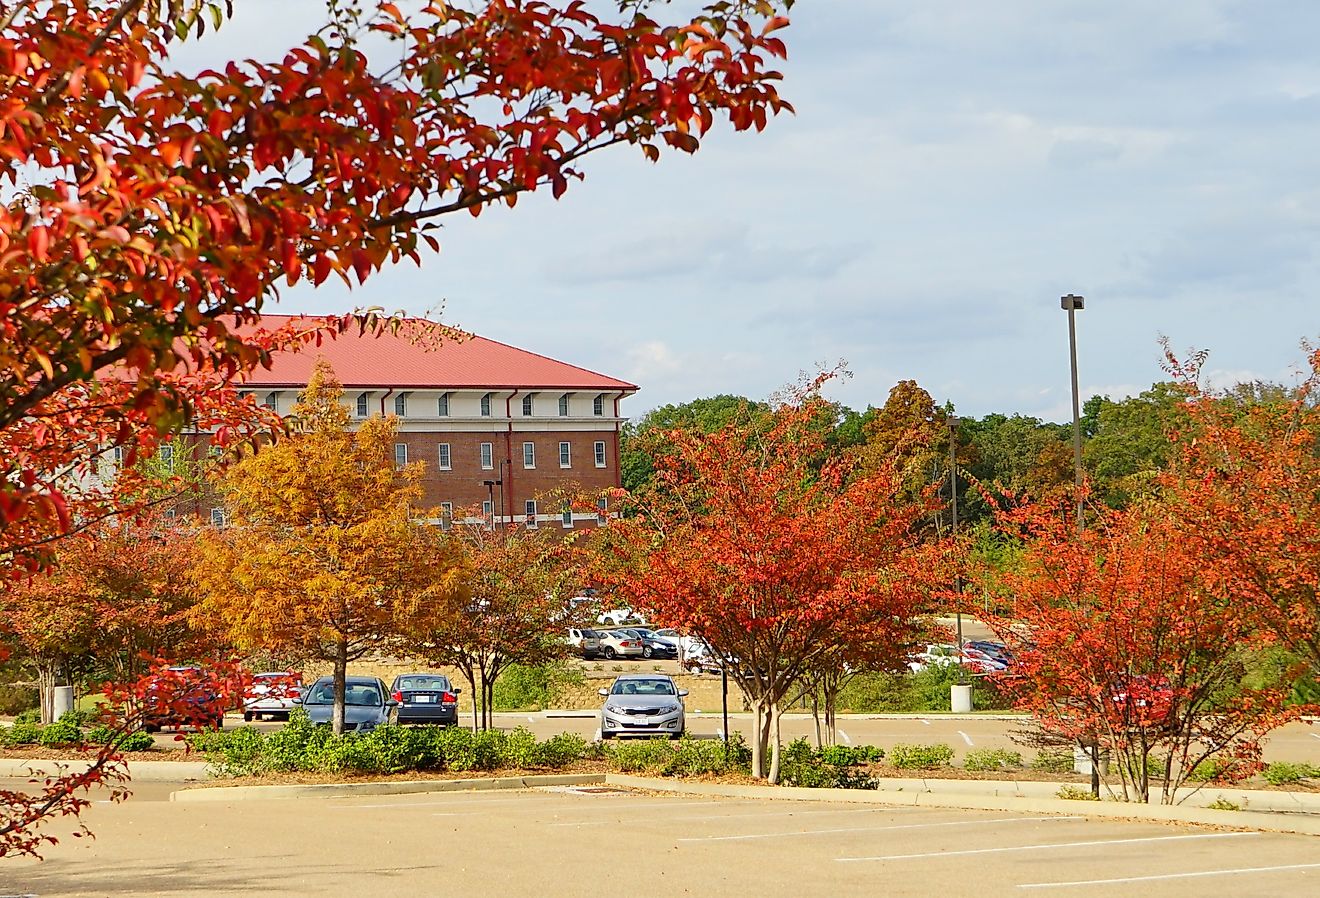 University of Mississippi campus building, Oxford in the fall. Image credit Feng Cheng via Shutterstock